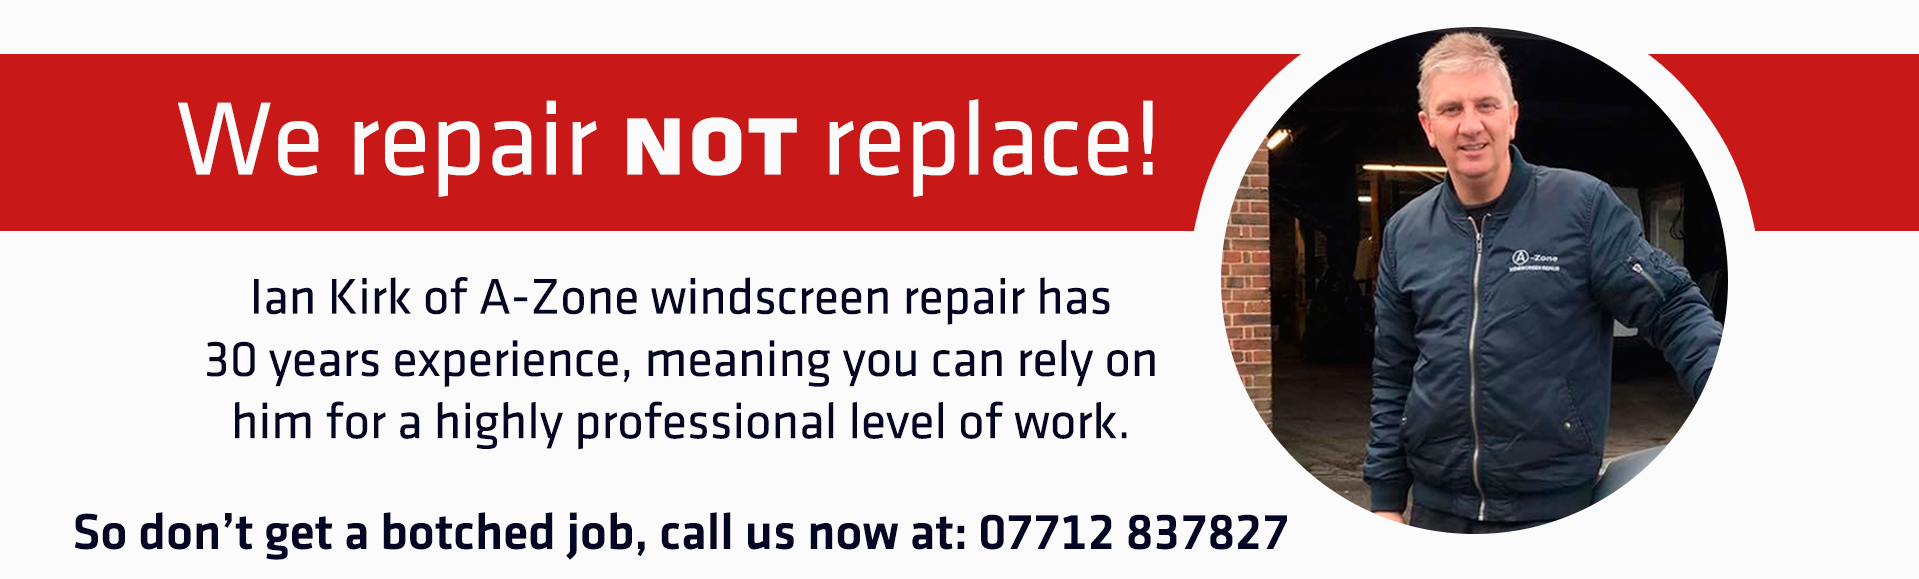 Specialist repairs to windscreens and glass